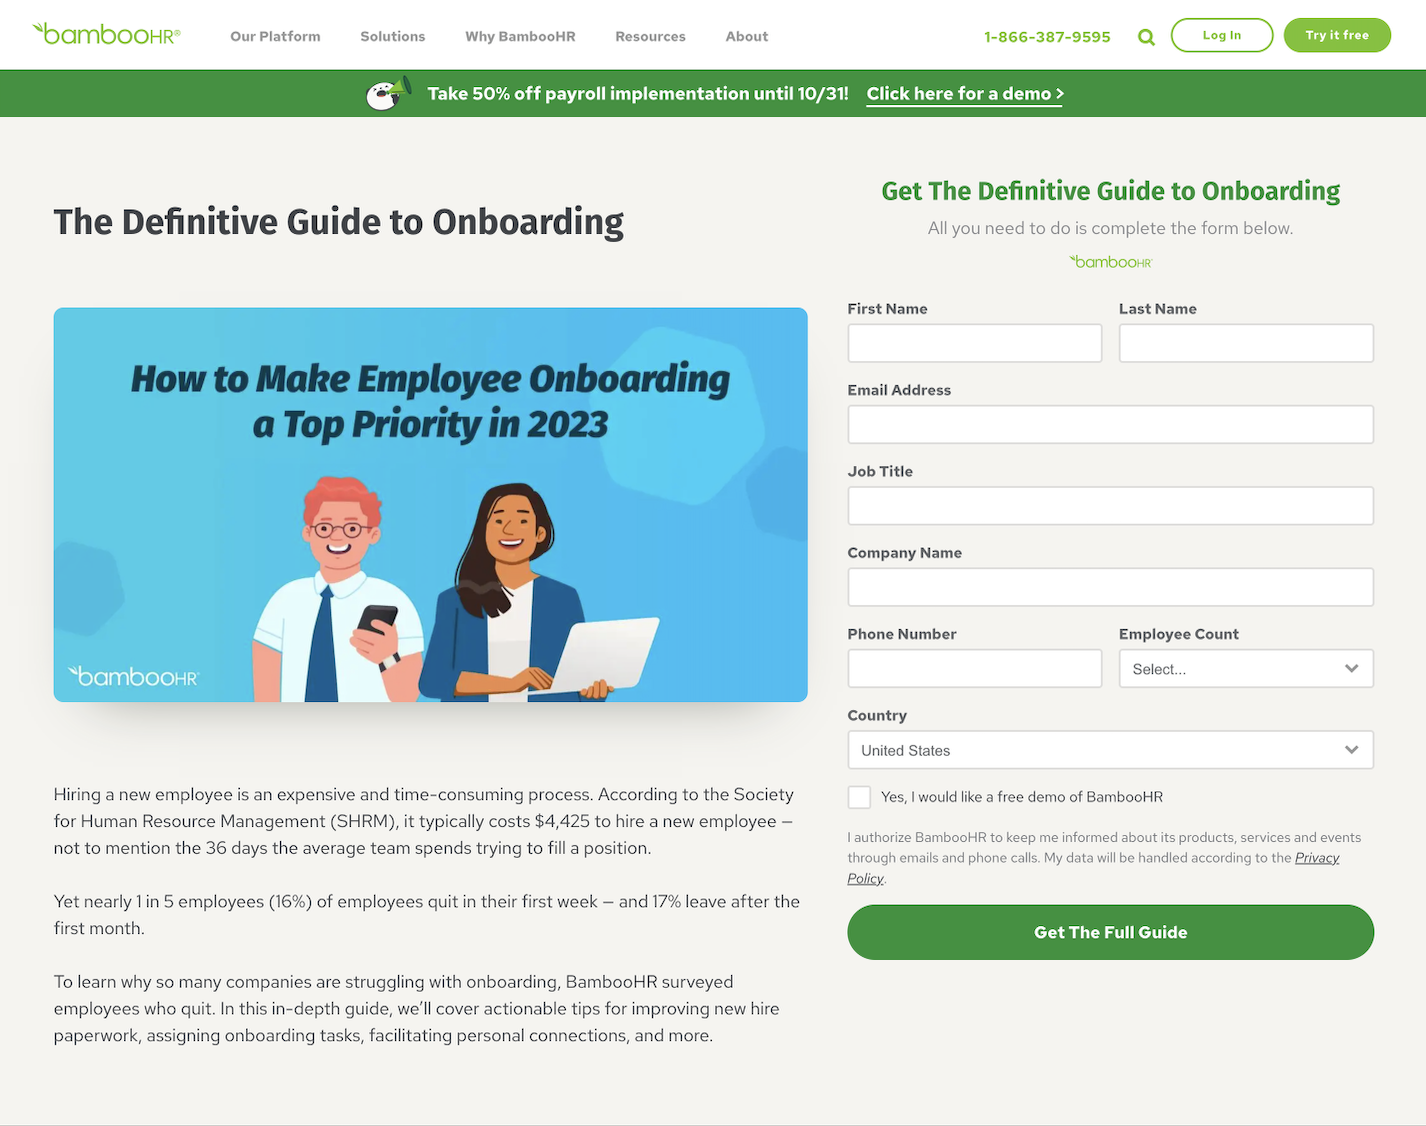 BambooHR Guide landing page